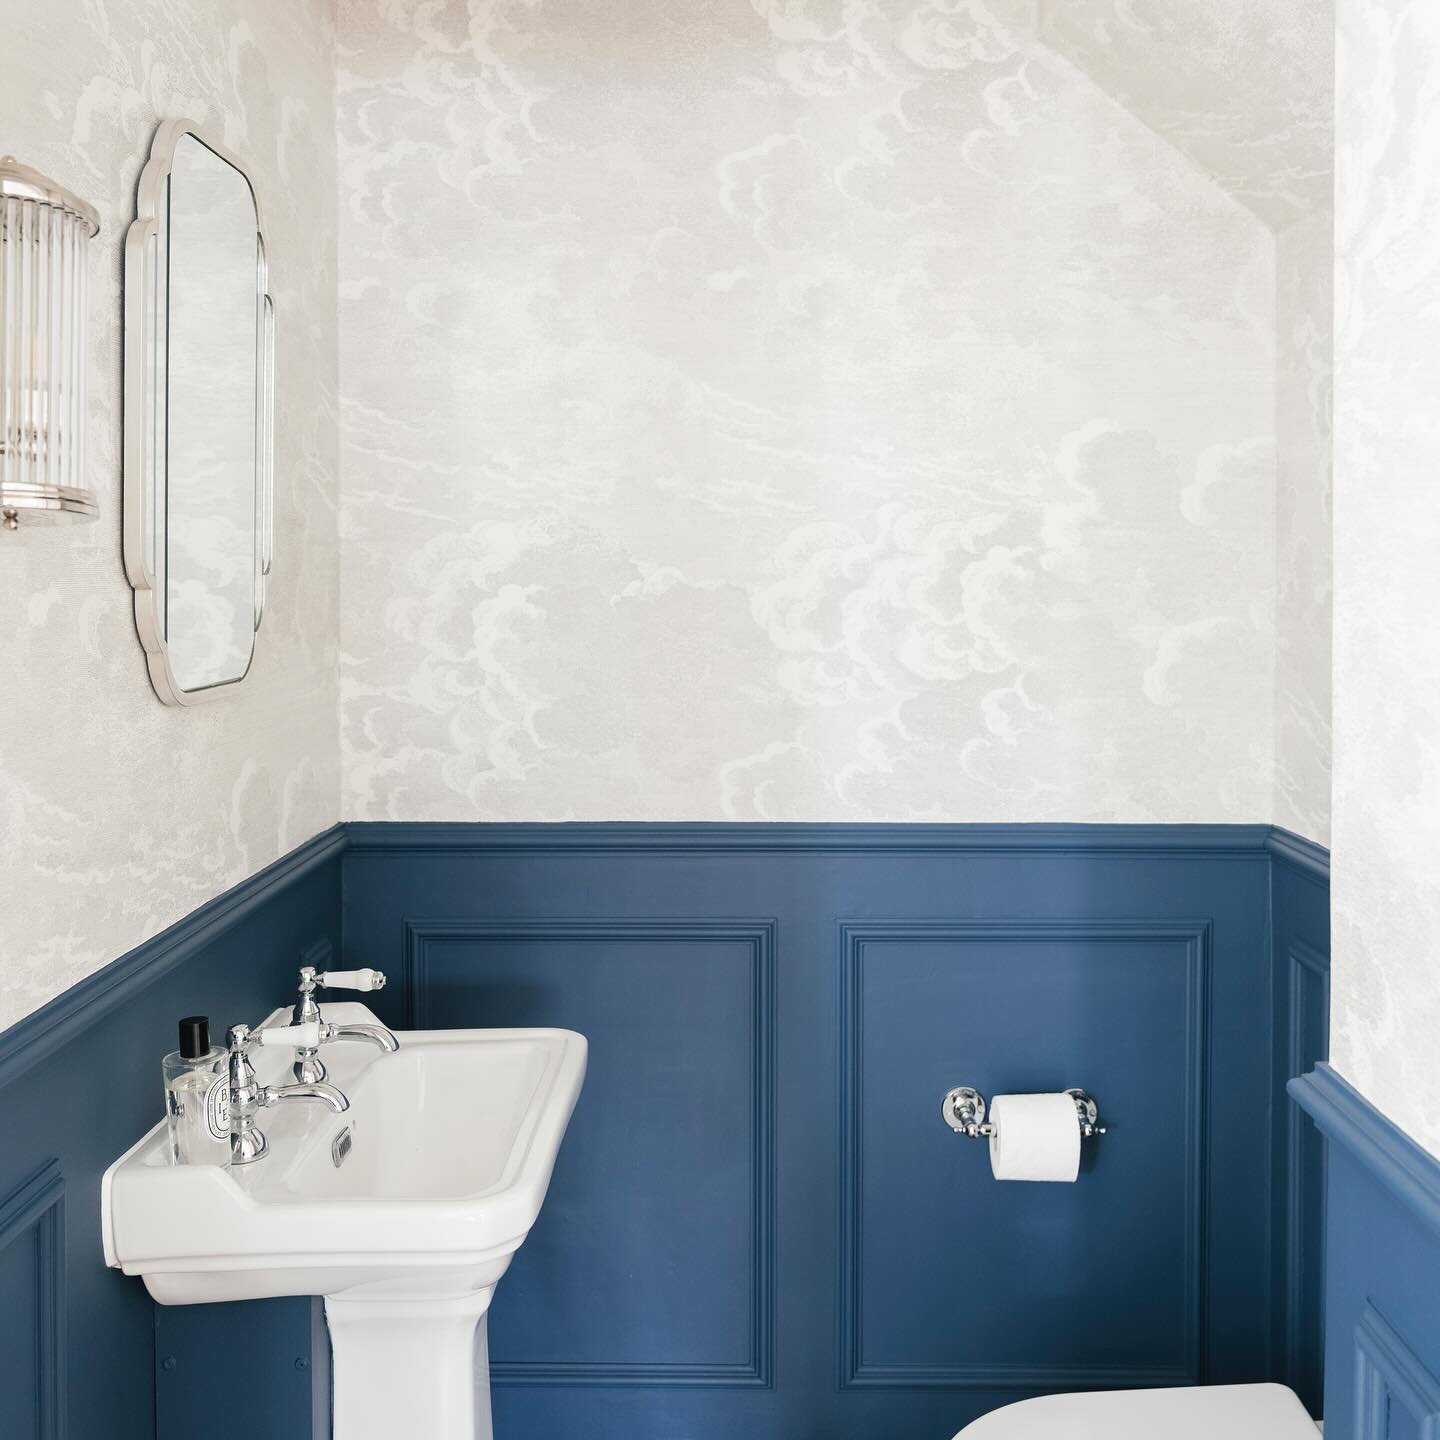 We have so much pleasure in turning small unusable spaces into functional and beautiful ones. Swipe for the progress and before. 

The cloakroom of our Essex project with Fornasetti Nuvolette Wallpaper and Contrast Stiffkey Blue with panelling and ch